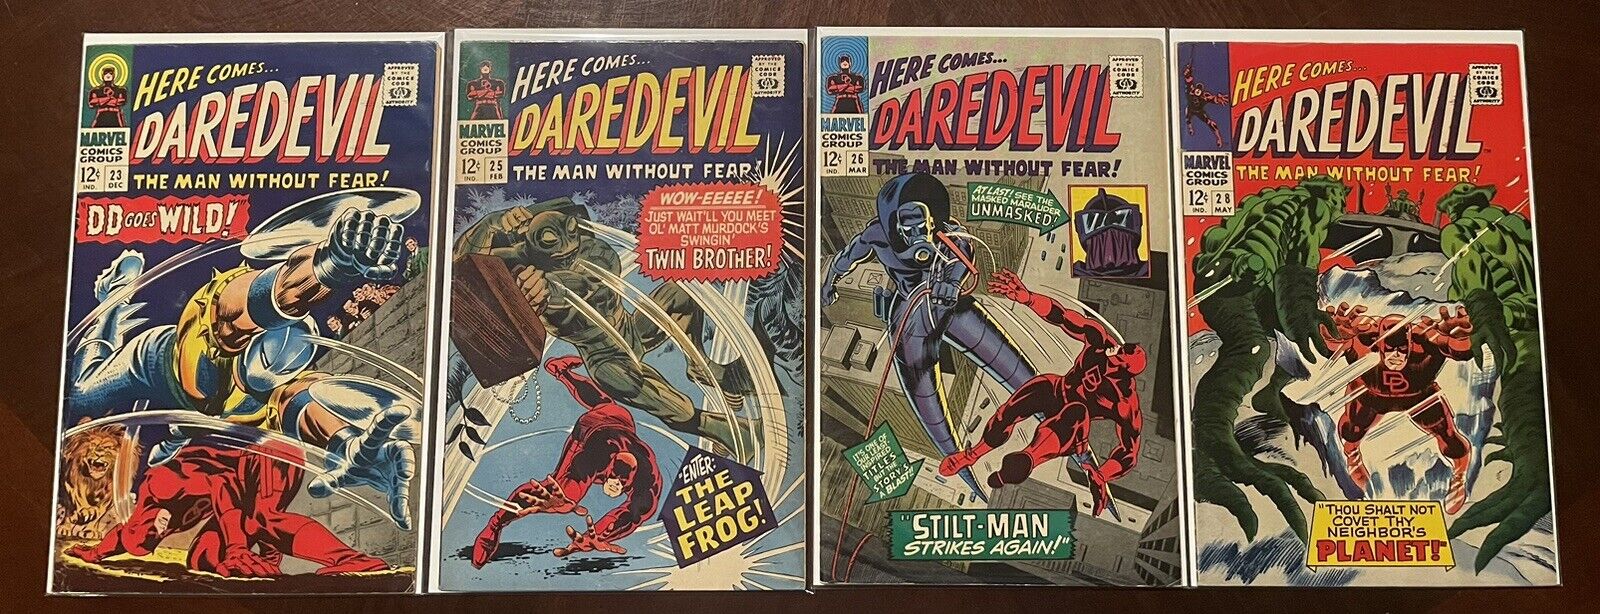 Daredevil Lot 23, 25, 26 & 28 1966 1st Appearance The Leap Frog